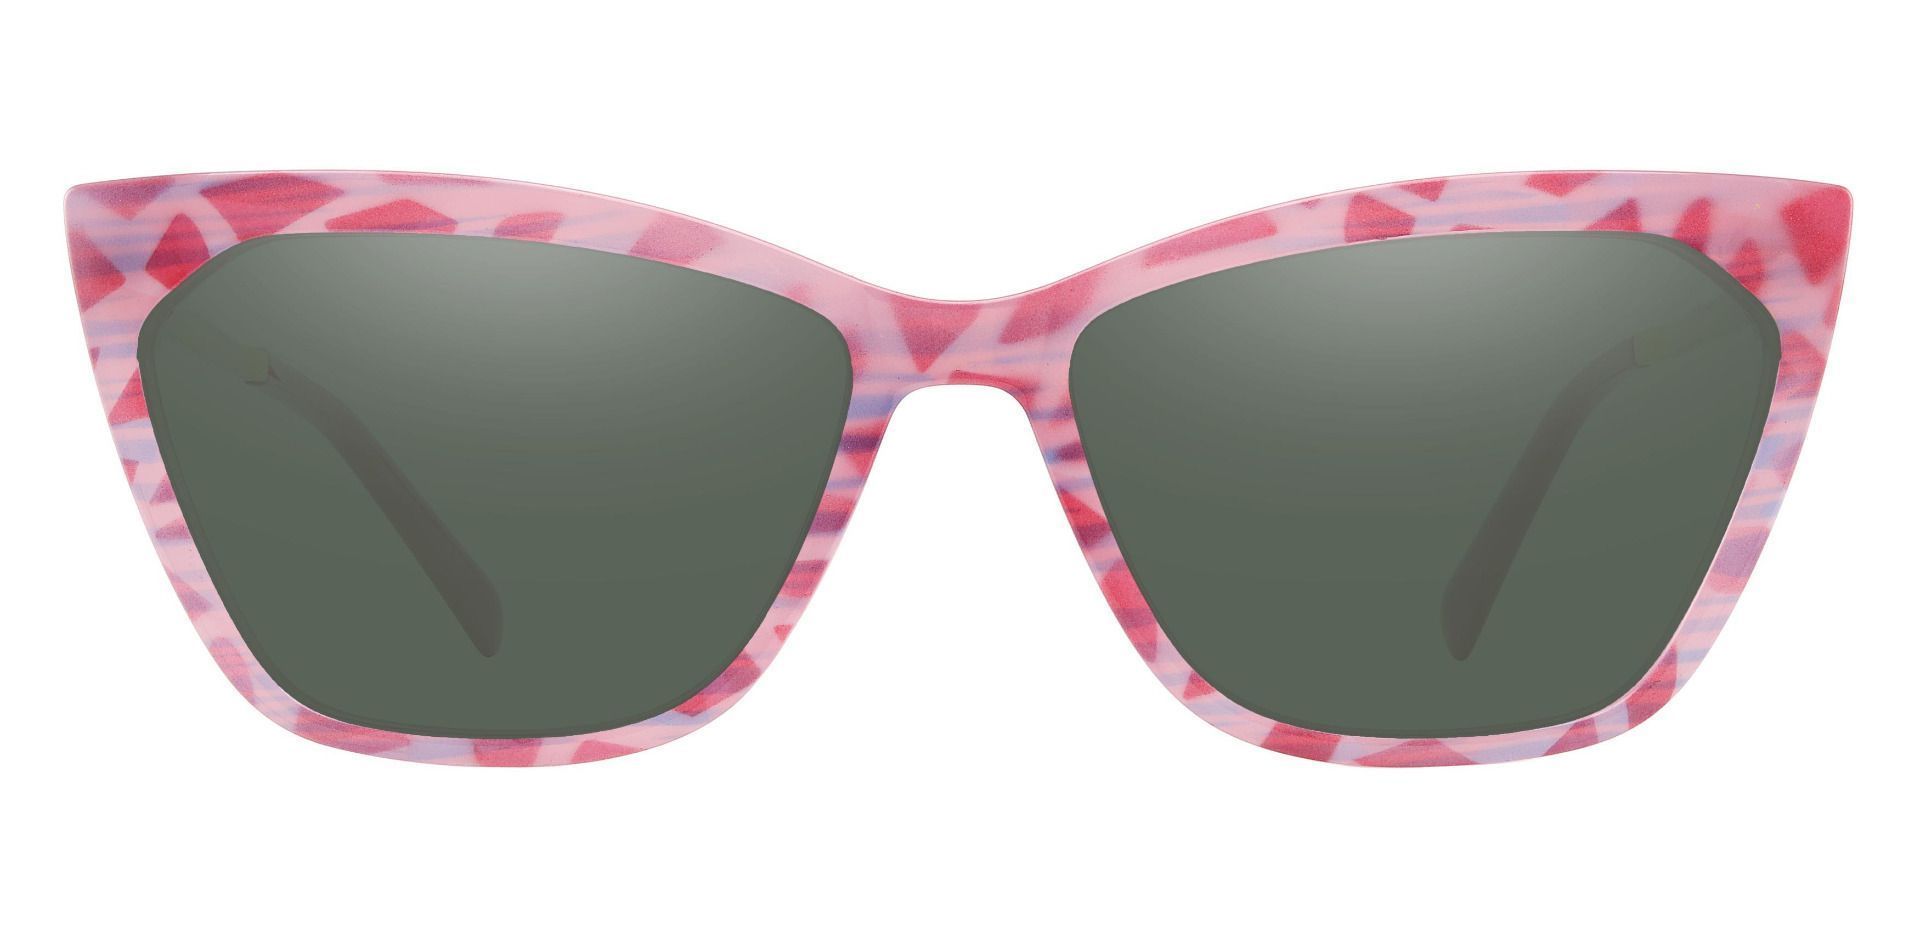 Addison Cat Eye Non-Rx Sunglasses - Pink Frame With Green Lenses